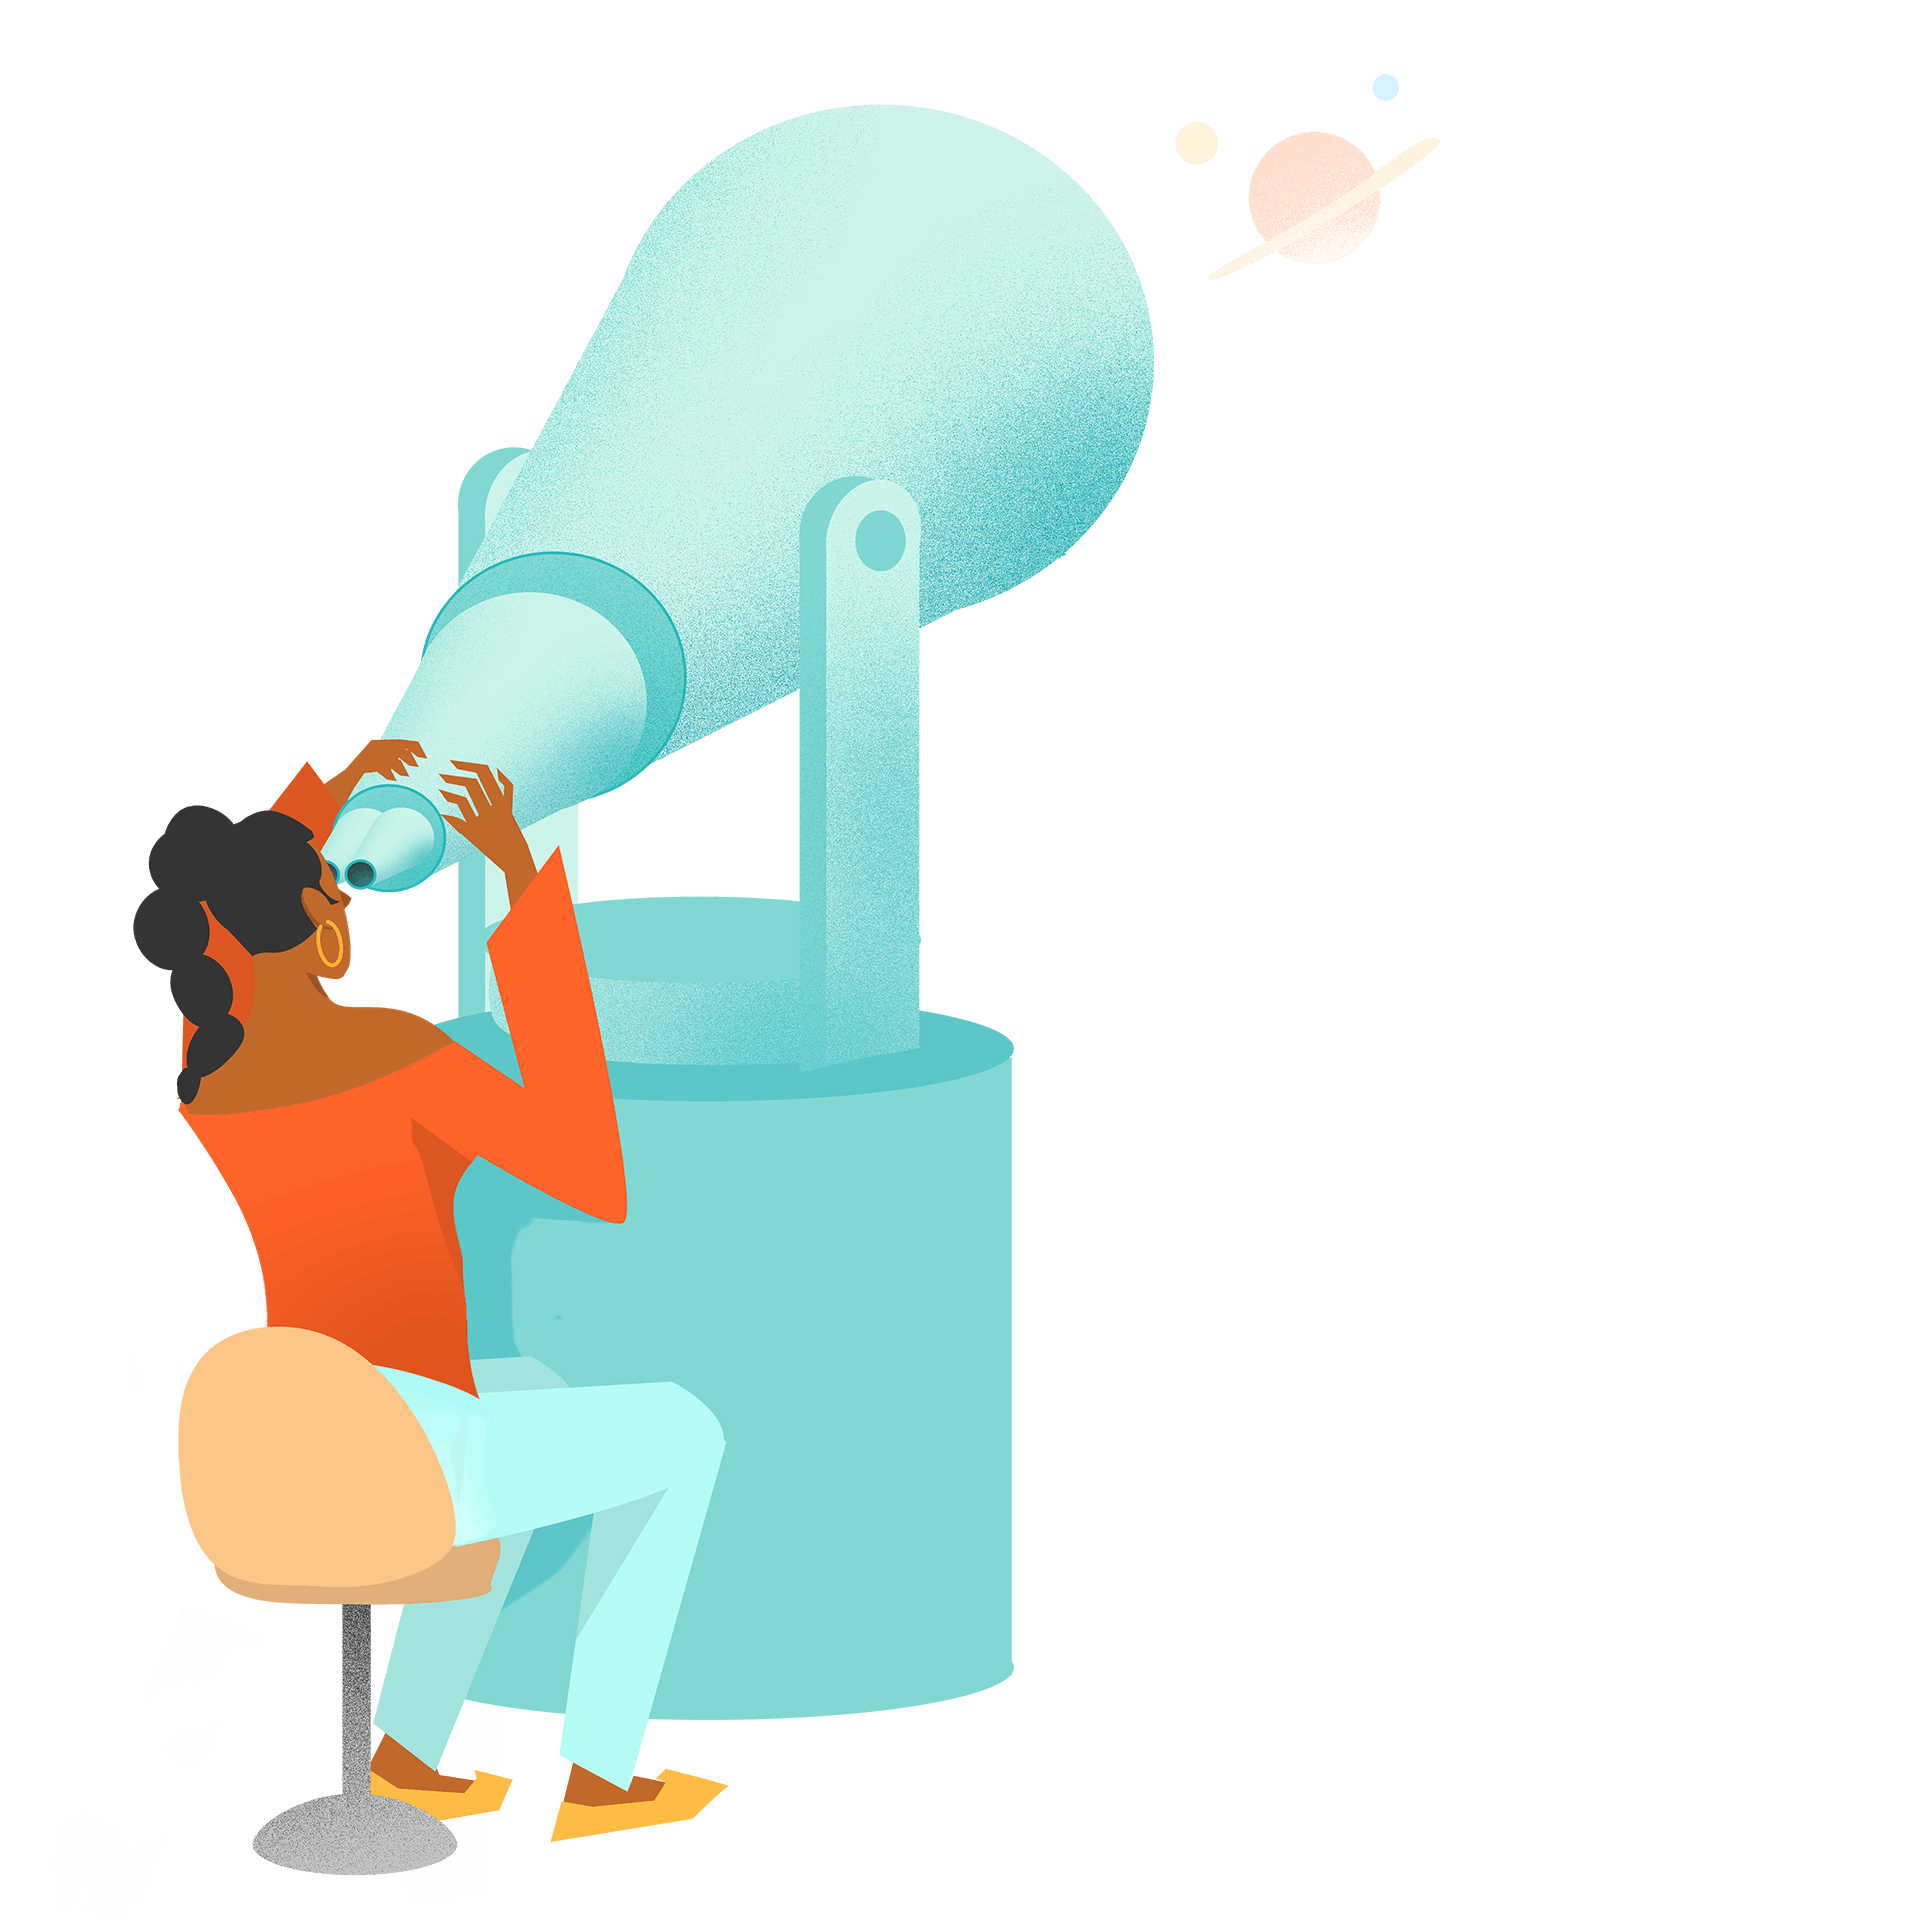 An illustration of a person looking into a telescope